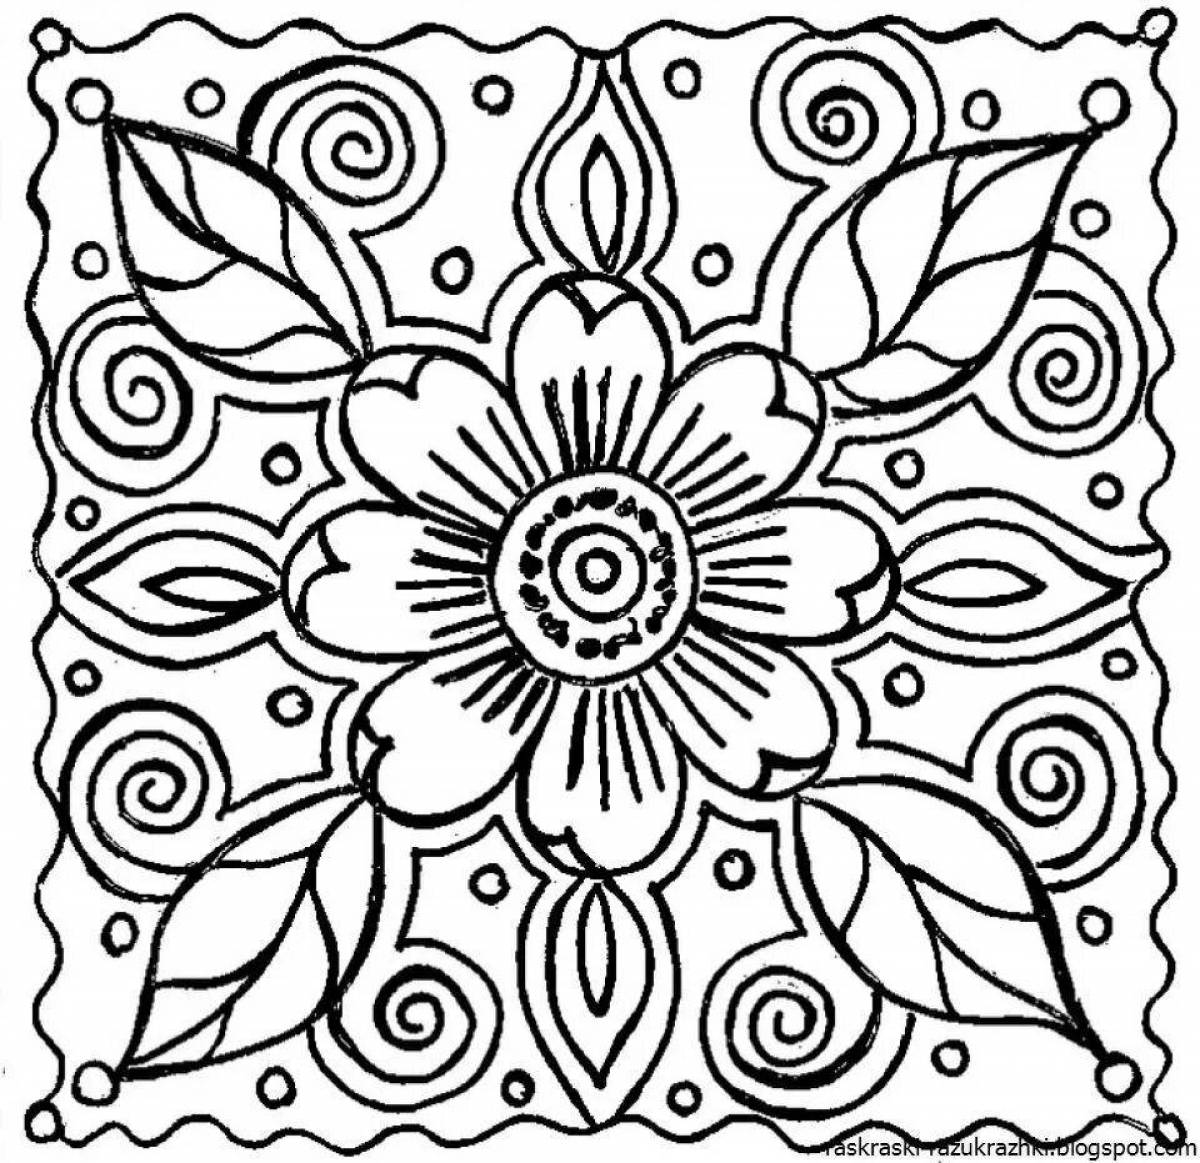 Attractive pavlovian scarf coloring pages for kids